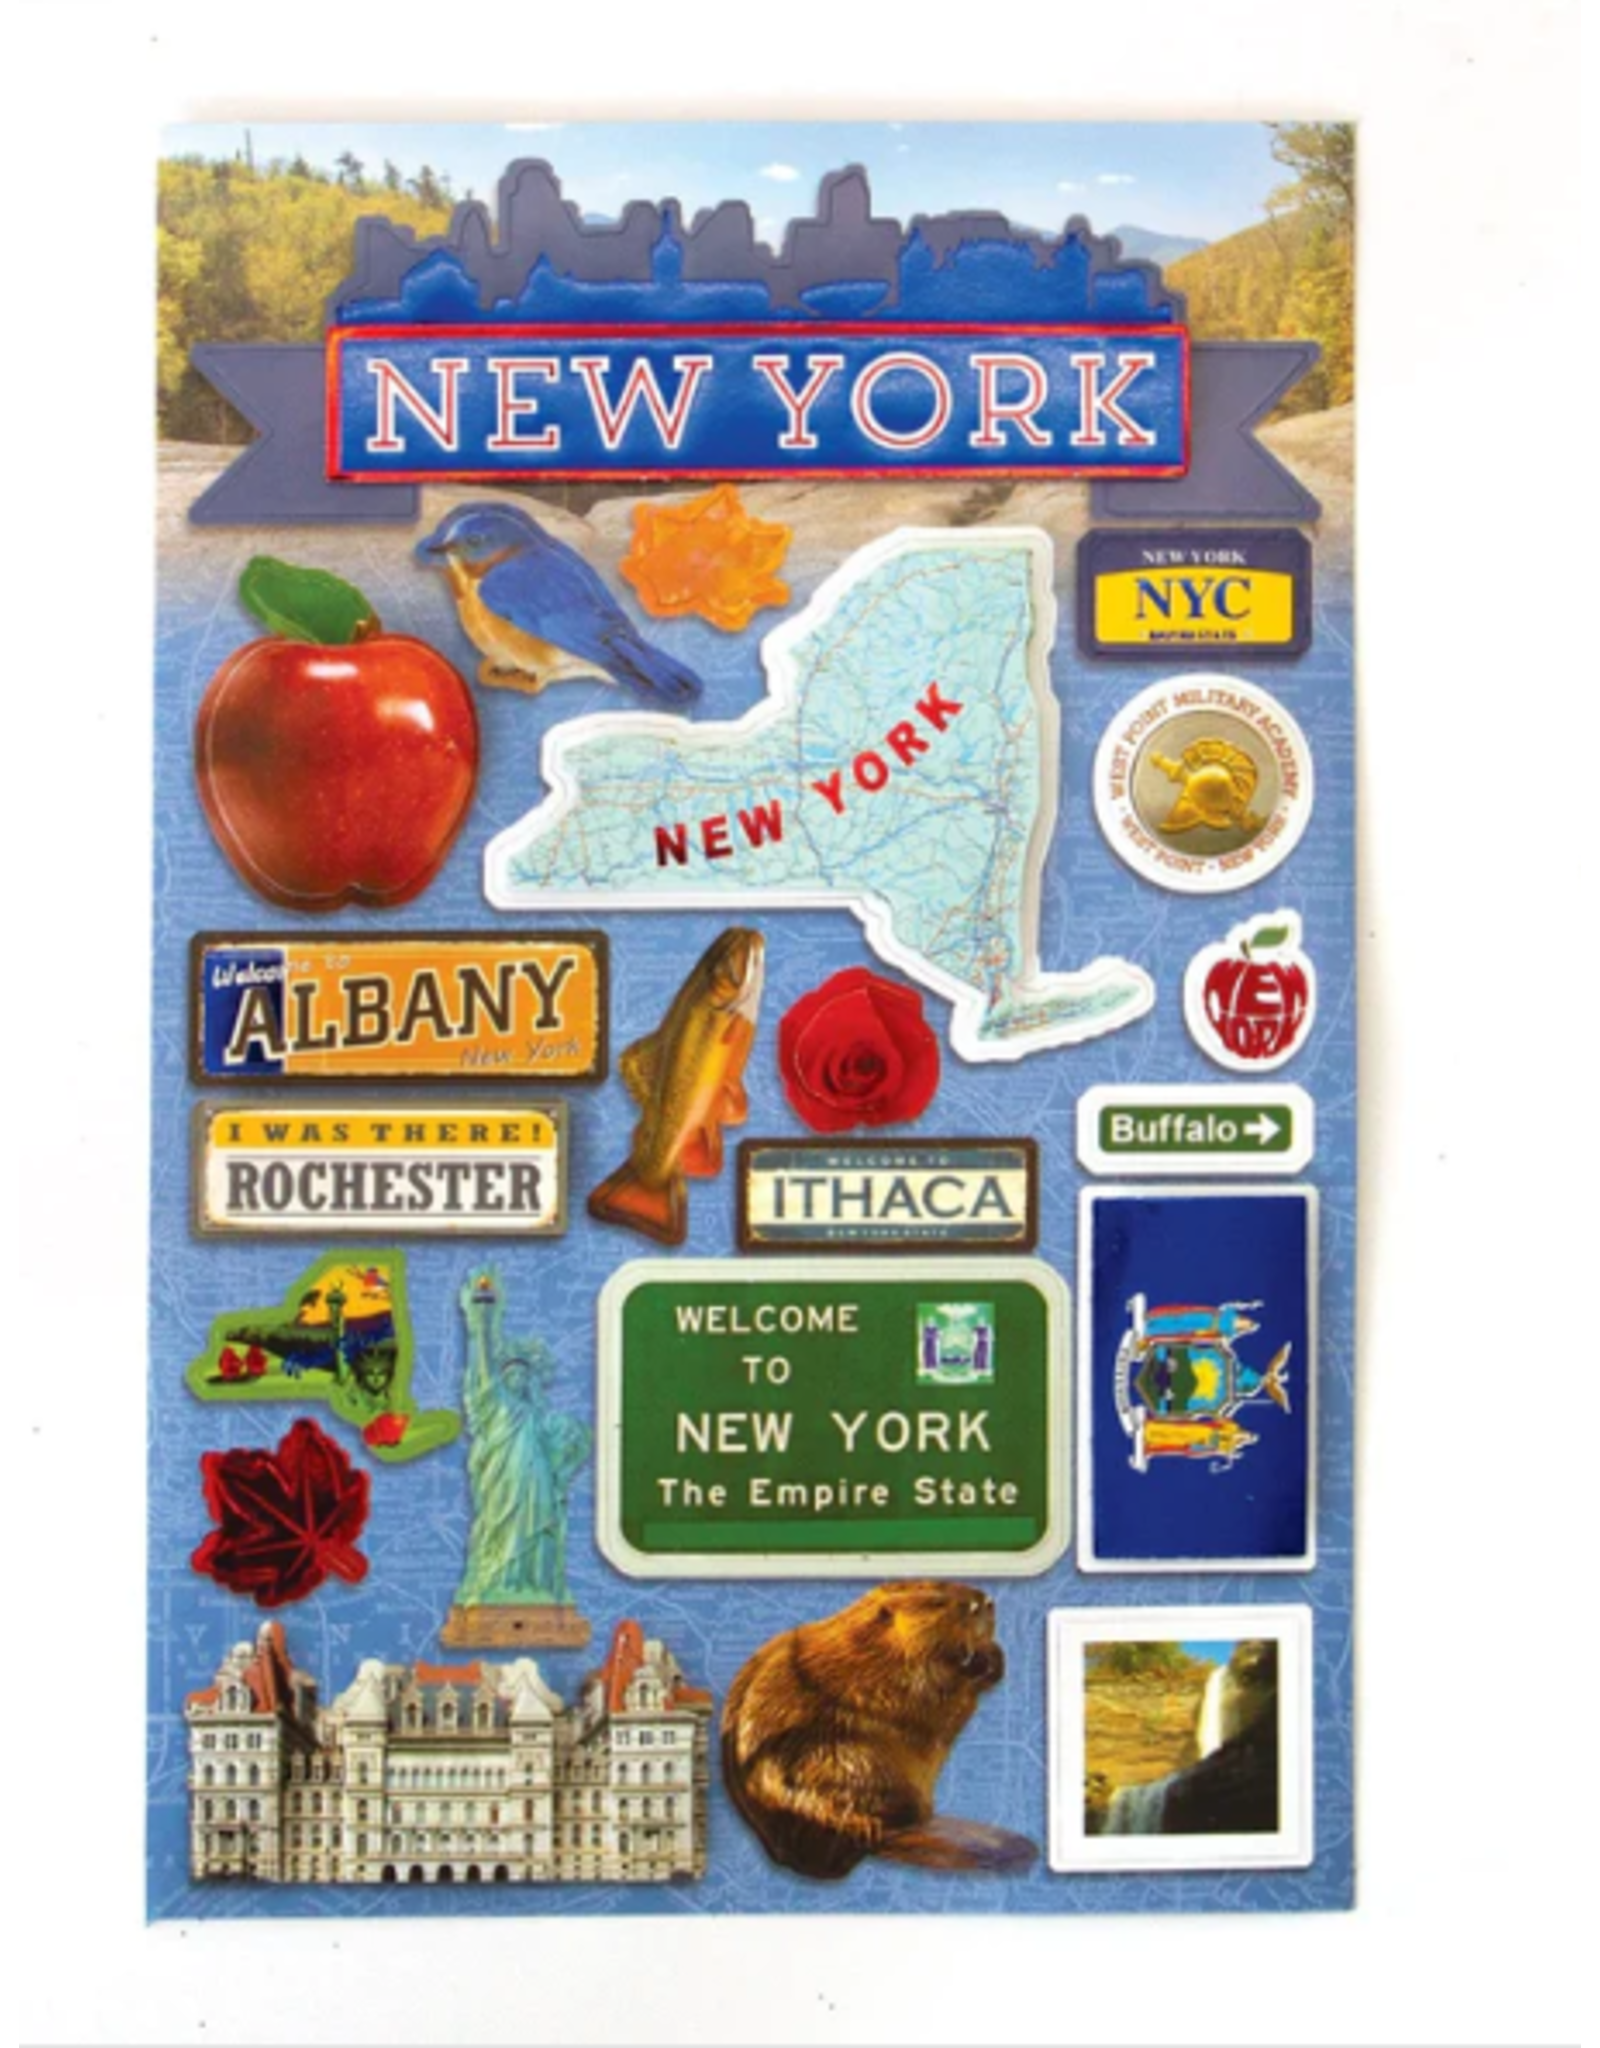 PAPER HOUSE PRODUCTIONS PAPER HOUSE DESTINATIONS NEW YORK STATE 3D STICKERS